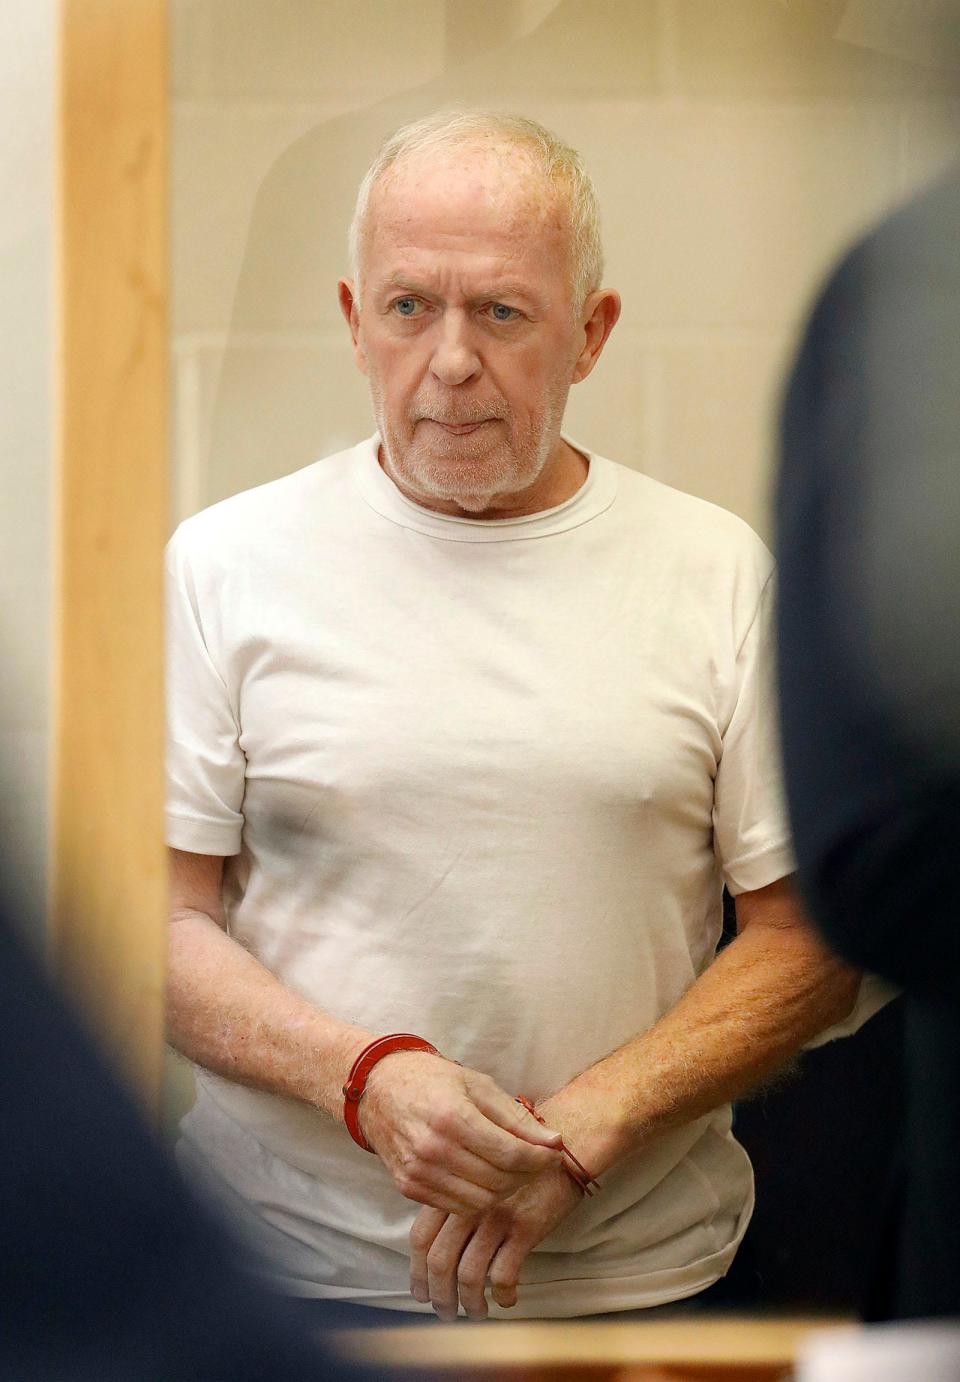 John Sullivan, 77, of Quincy, appears in Quincy District Court on Wednesday, Dec. 7, 2022, for a dangerousness hearing related to an alleged hate crime.